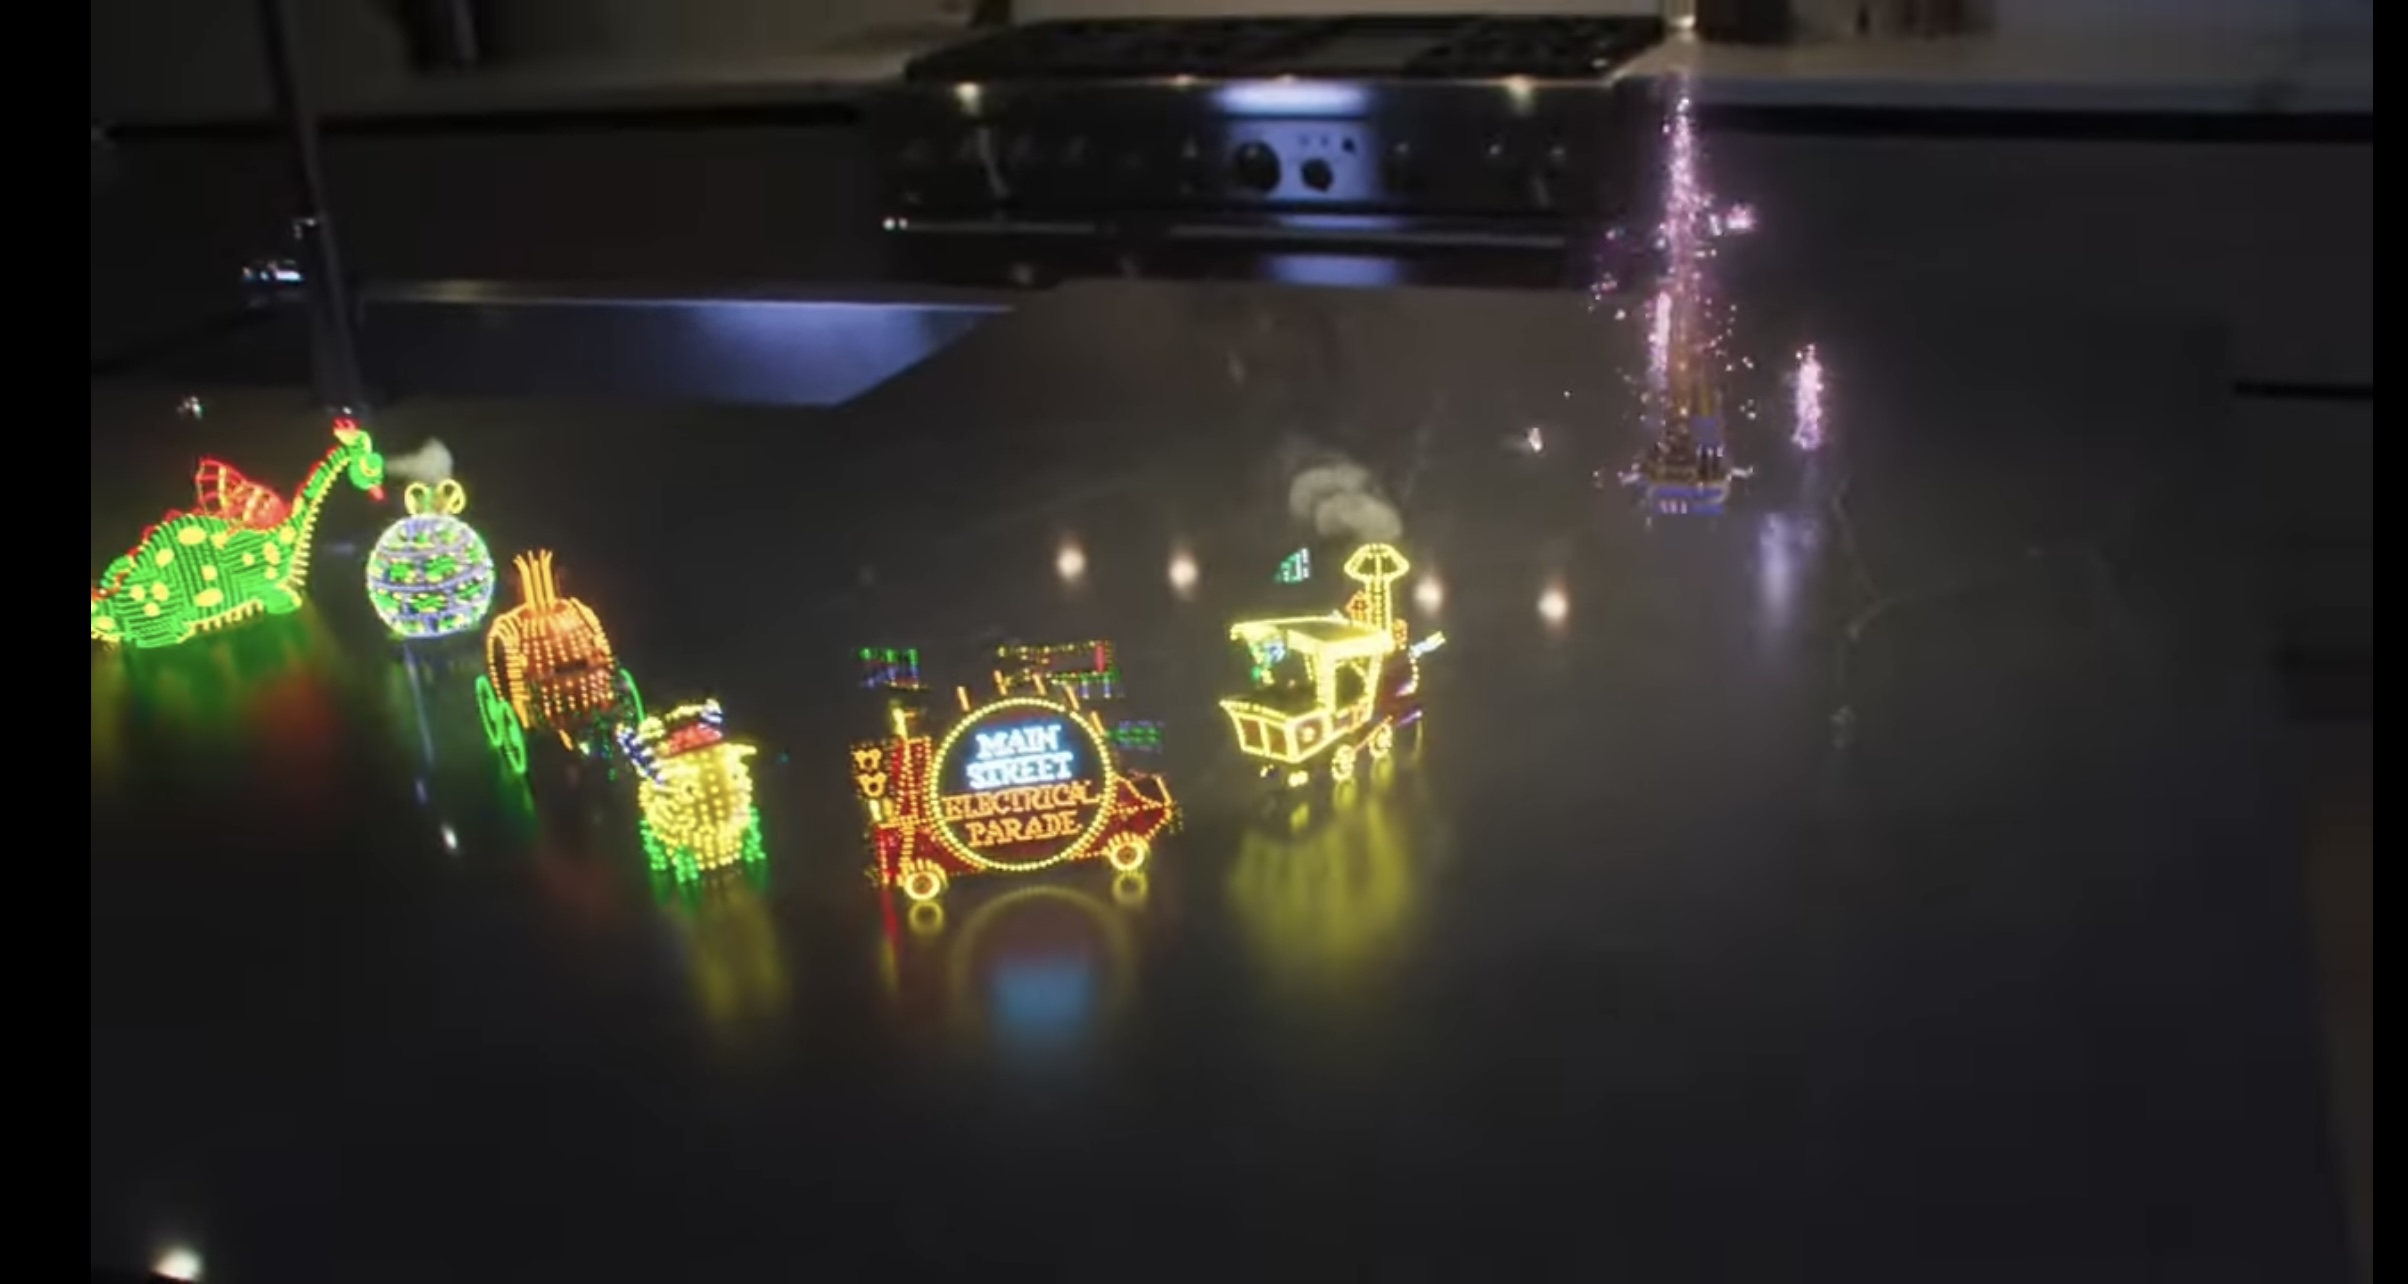 The Main Street Electrical Parade on your kitchen table via the Apple Vision Pro